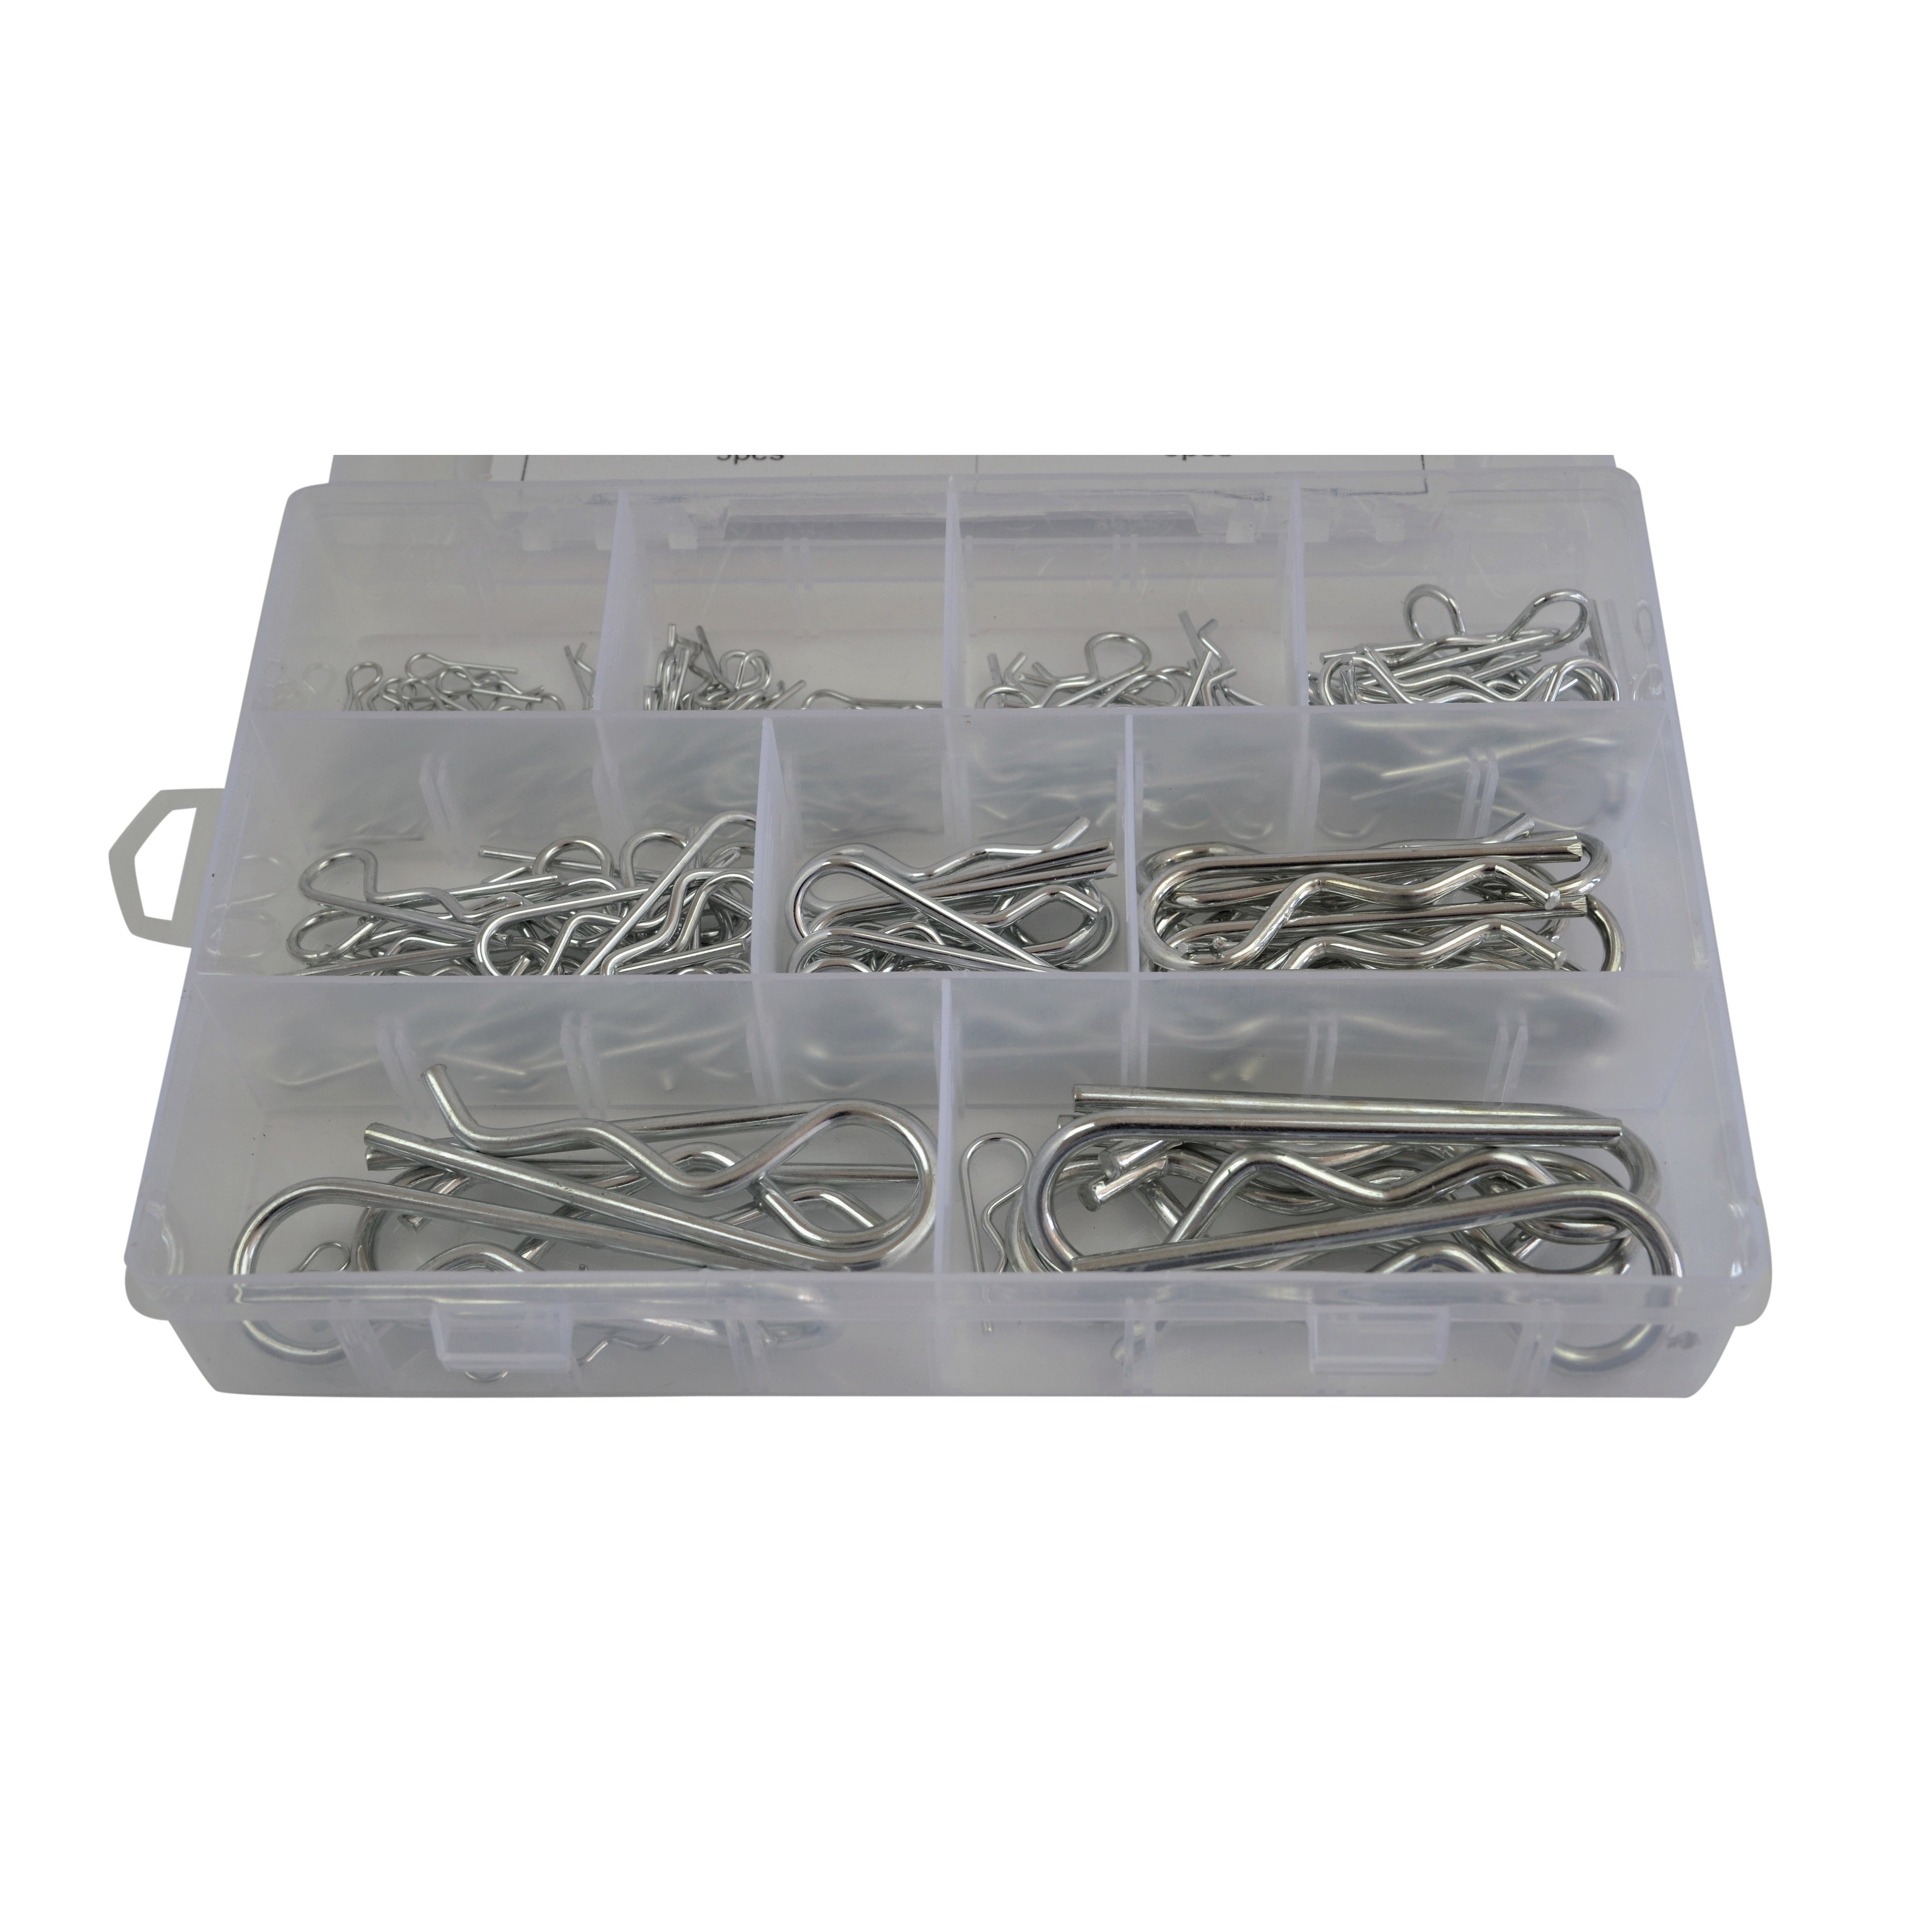 150 Piece R Pin clip grab kit assortment  R1 up to R4-75 mm Hitch Pin